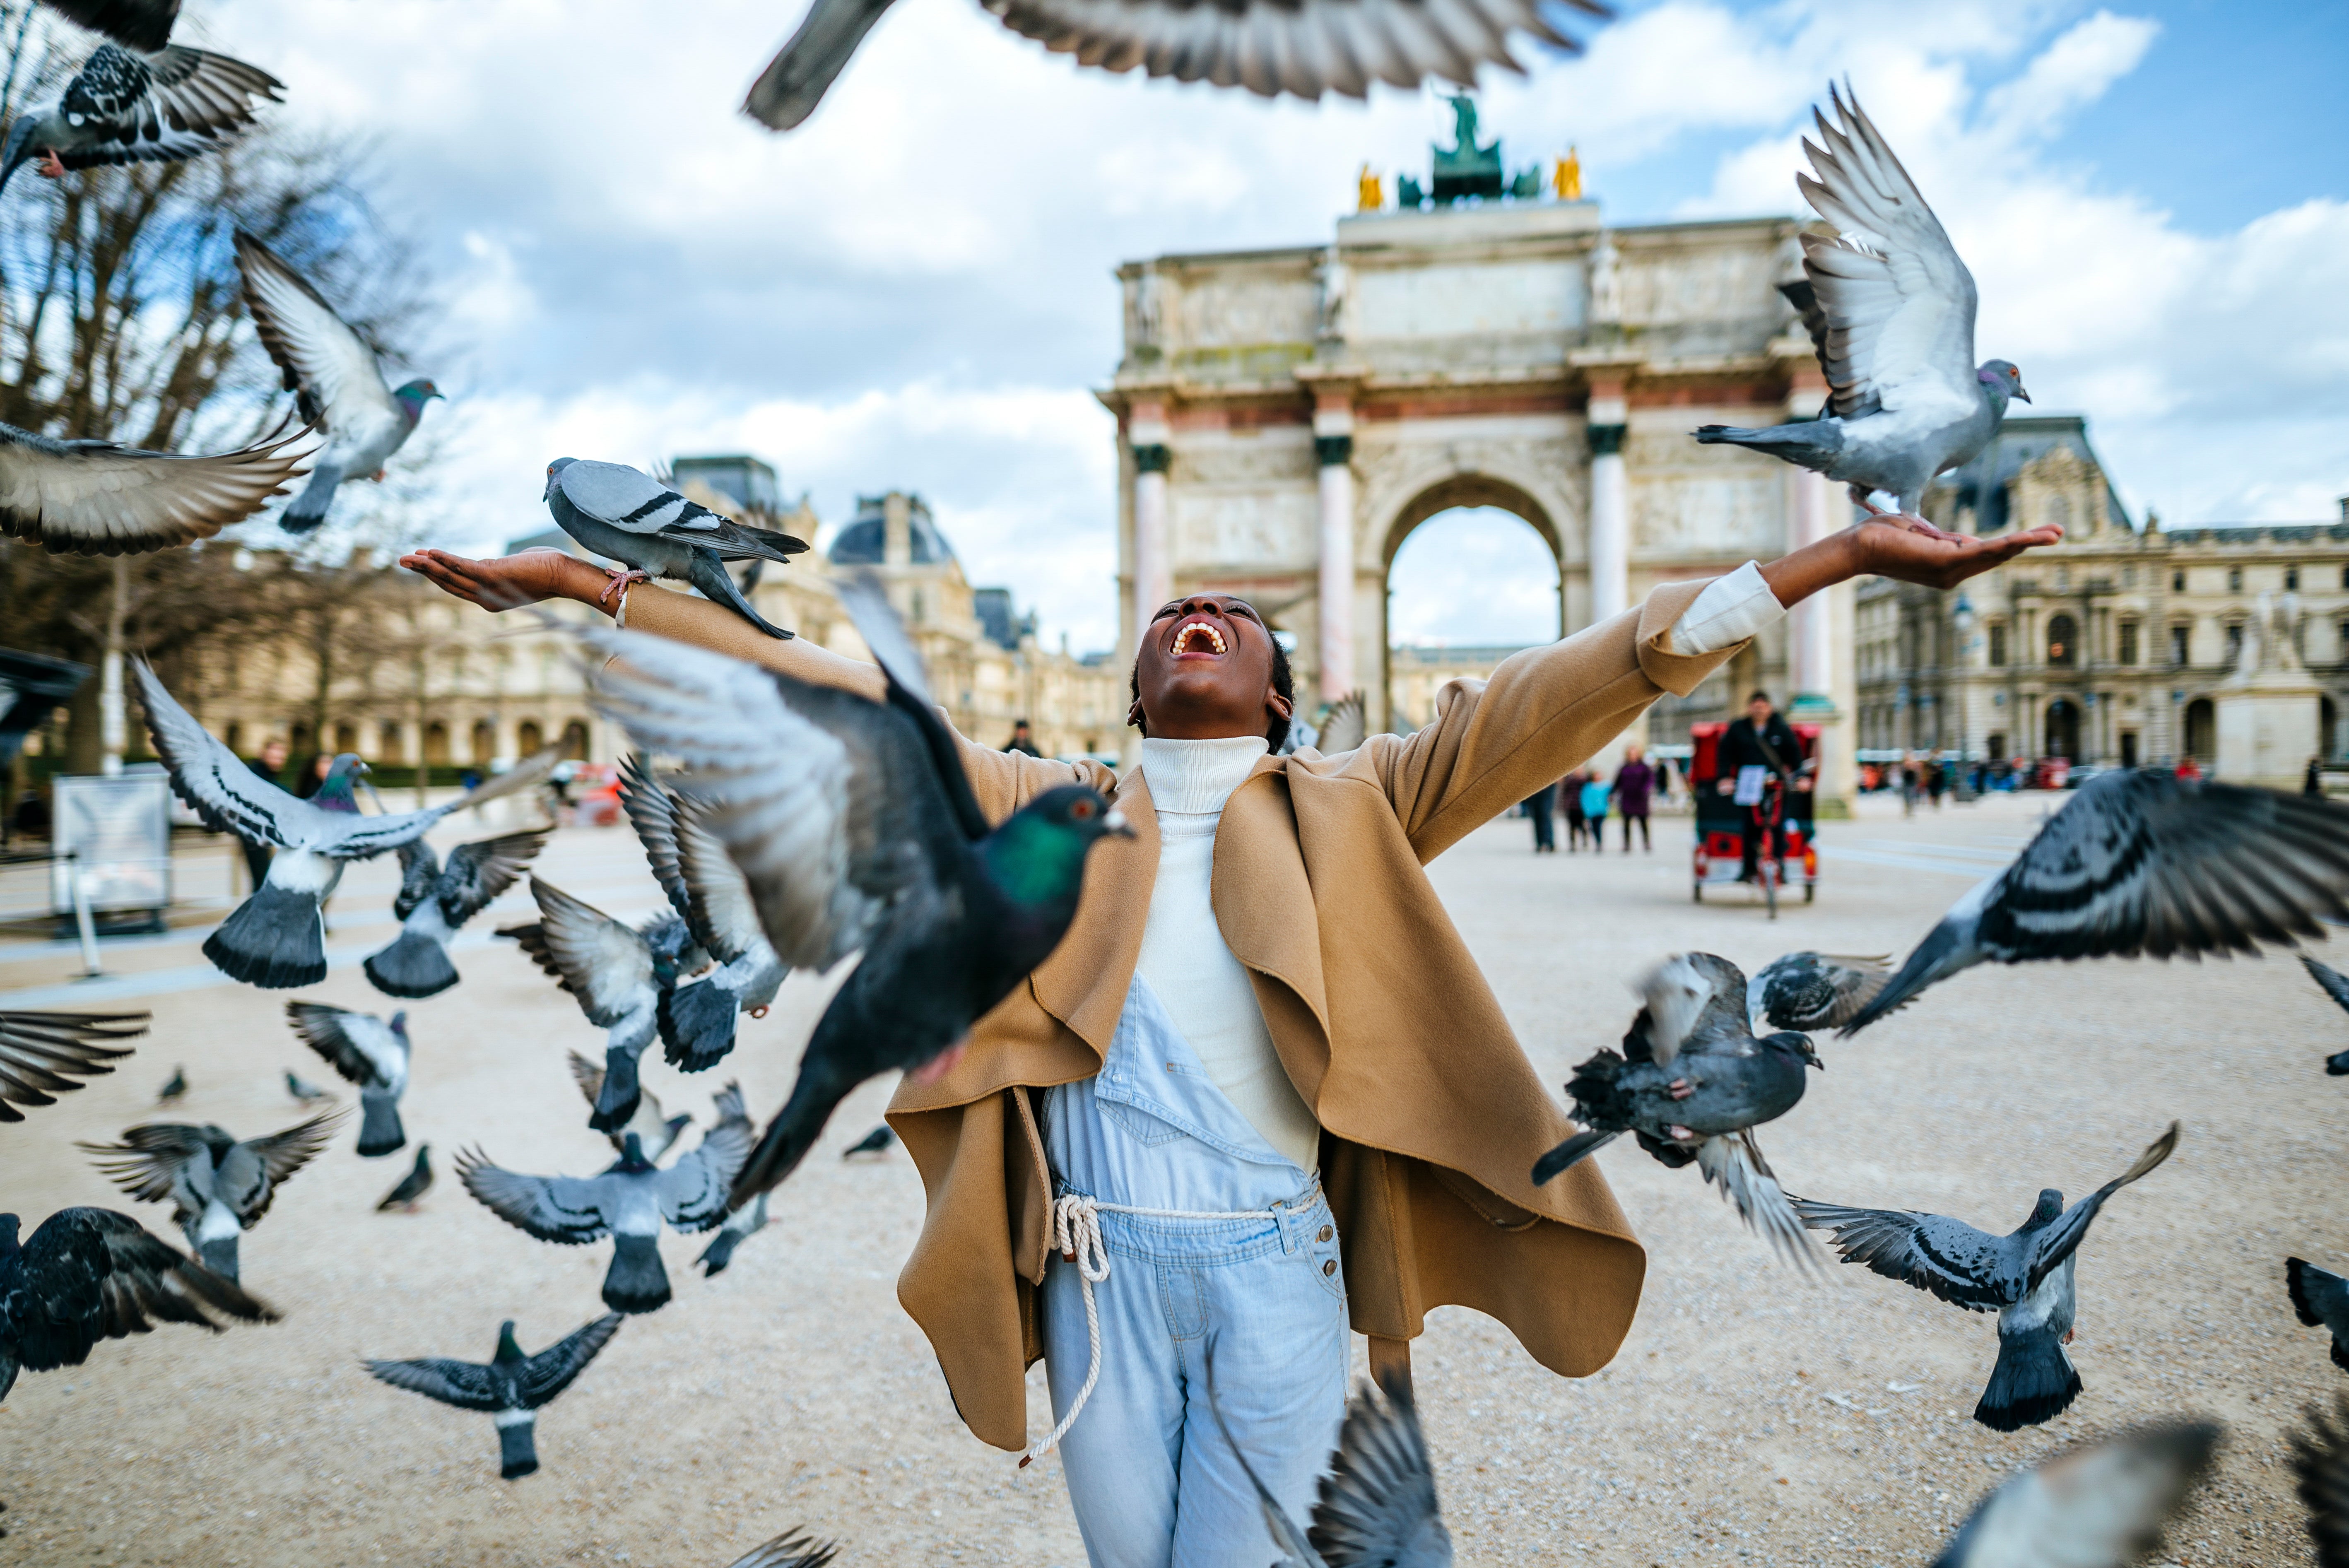 The Ultimate Black Girl's Travel Guide To Paris